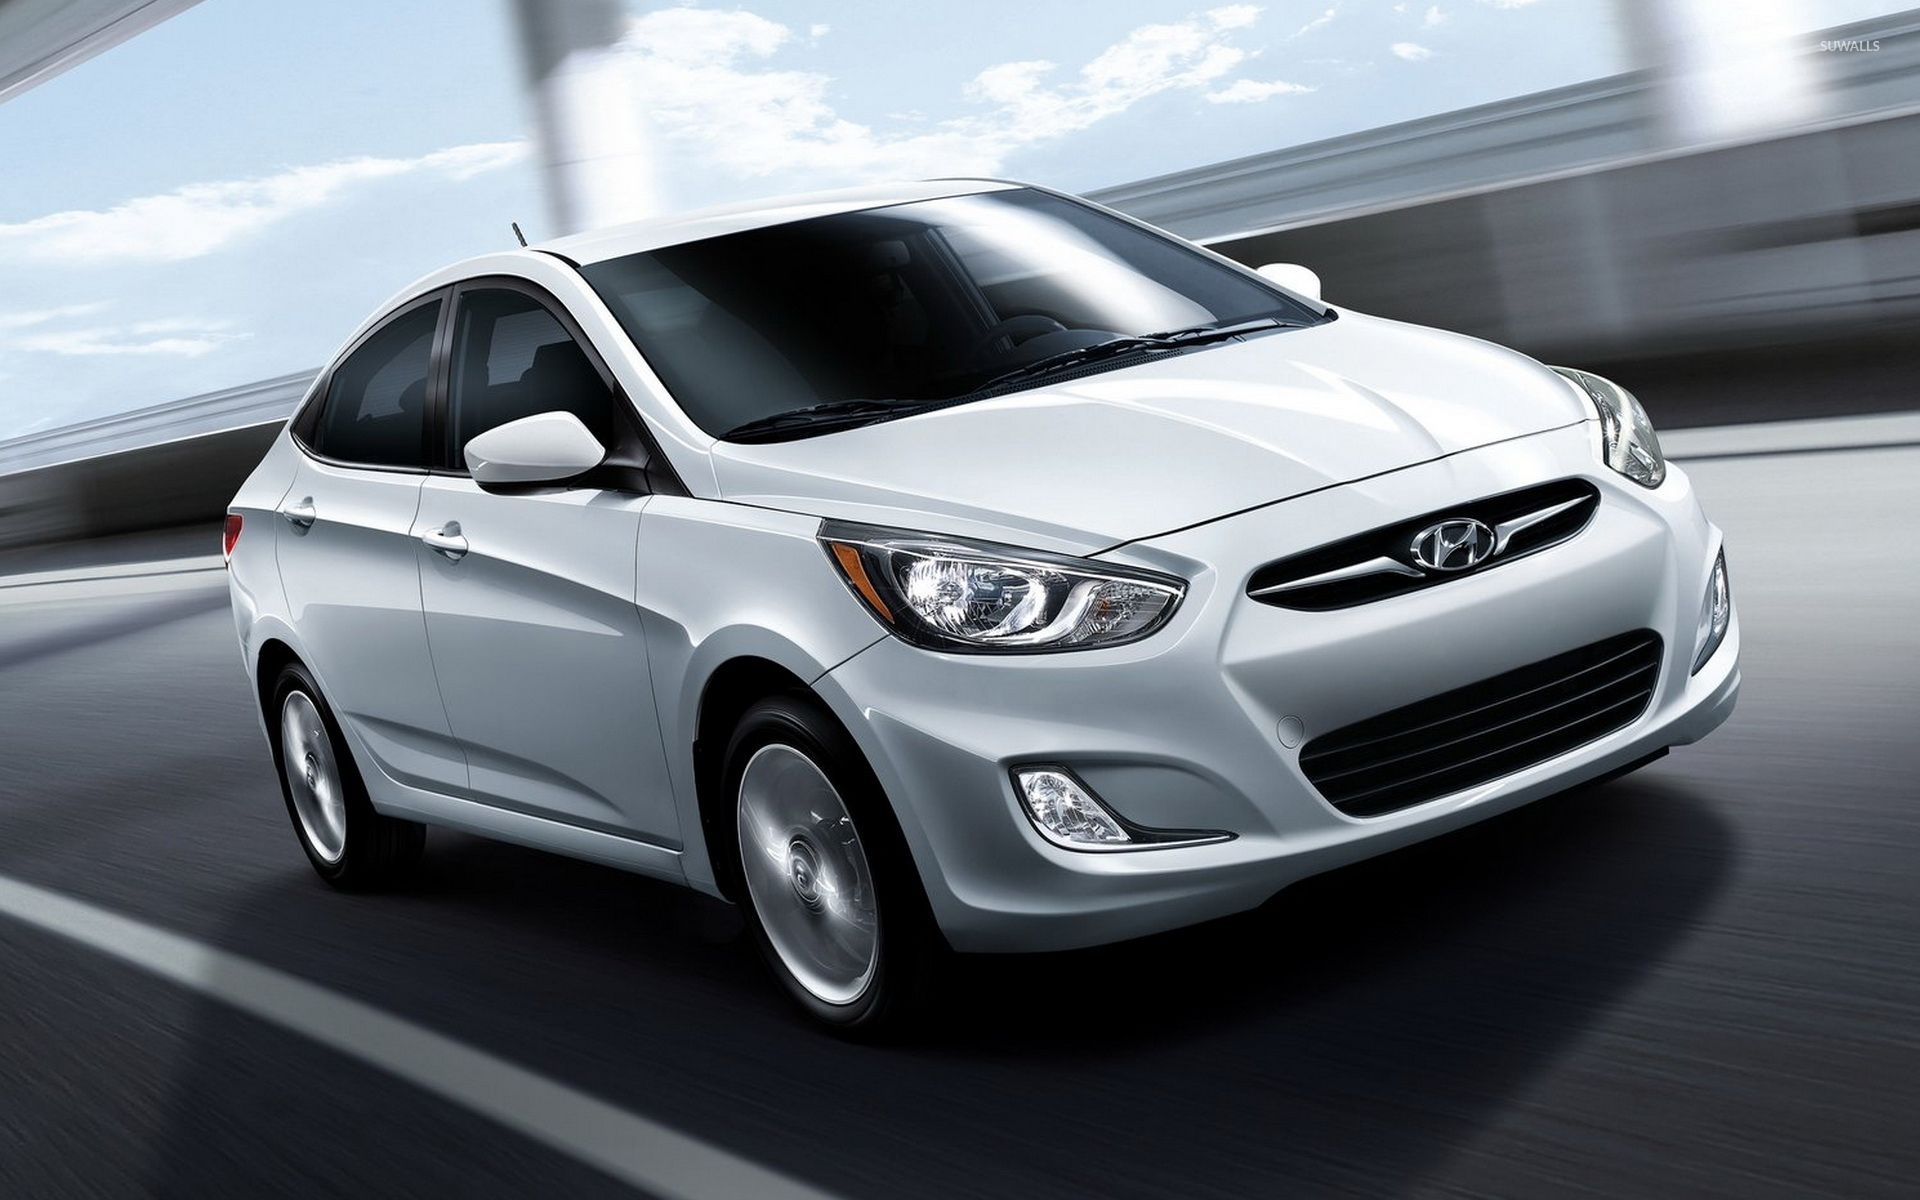 2013 Silver Hyundai Accent front side view wallpaper - Car wallpapers ...